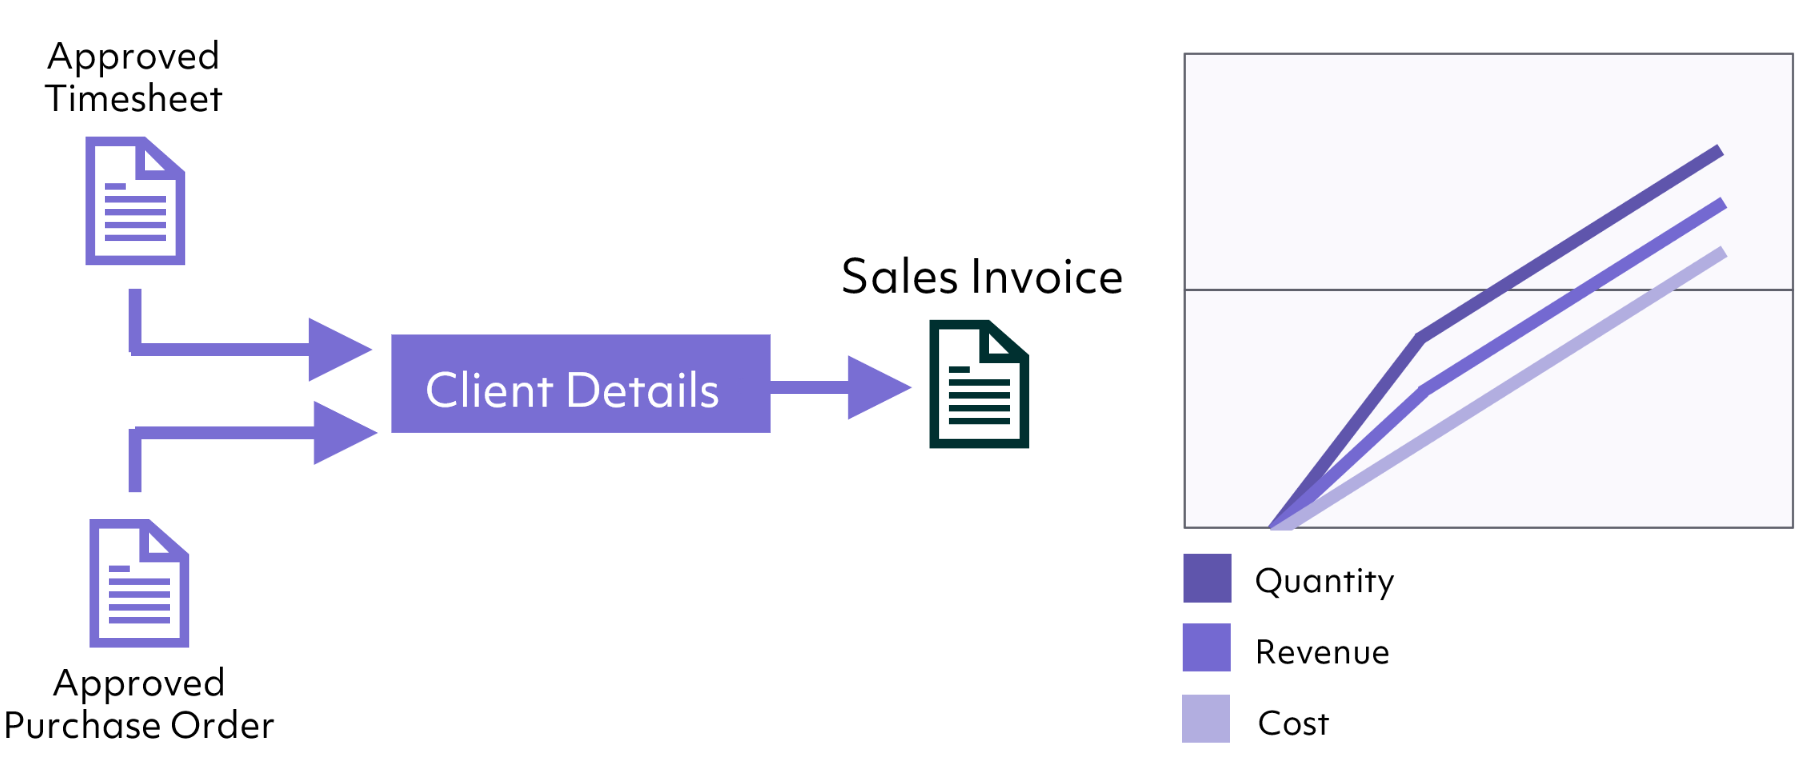 Invoices created from Approved and Priced Timesheets